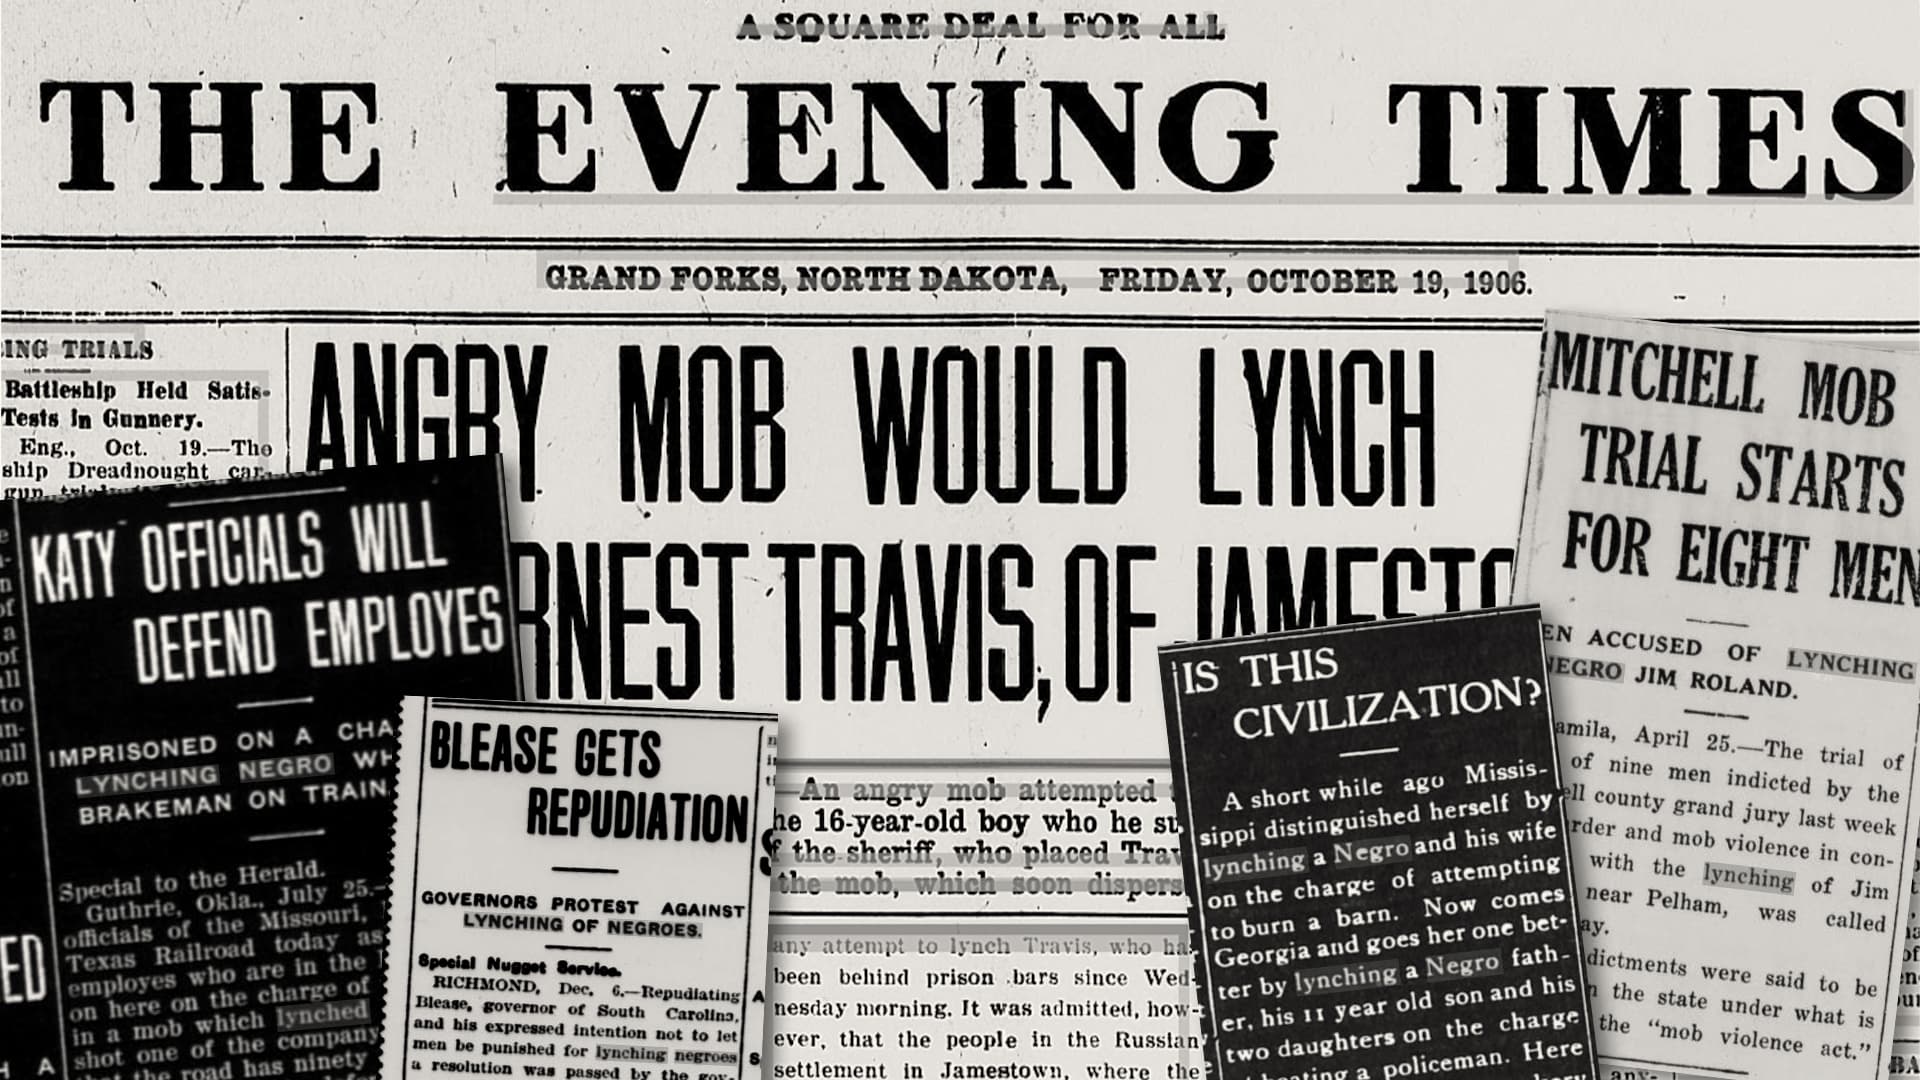 Collage of headlines about lynchings throughout U.S. history